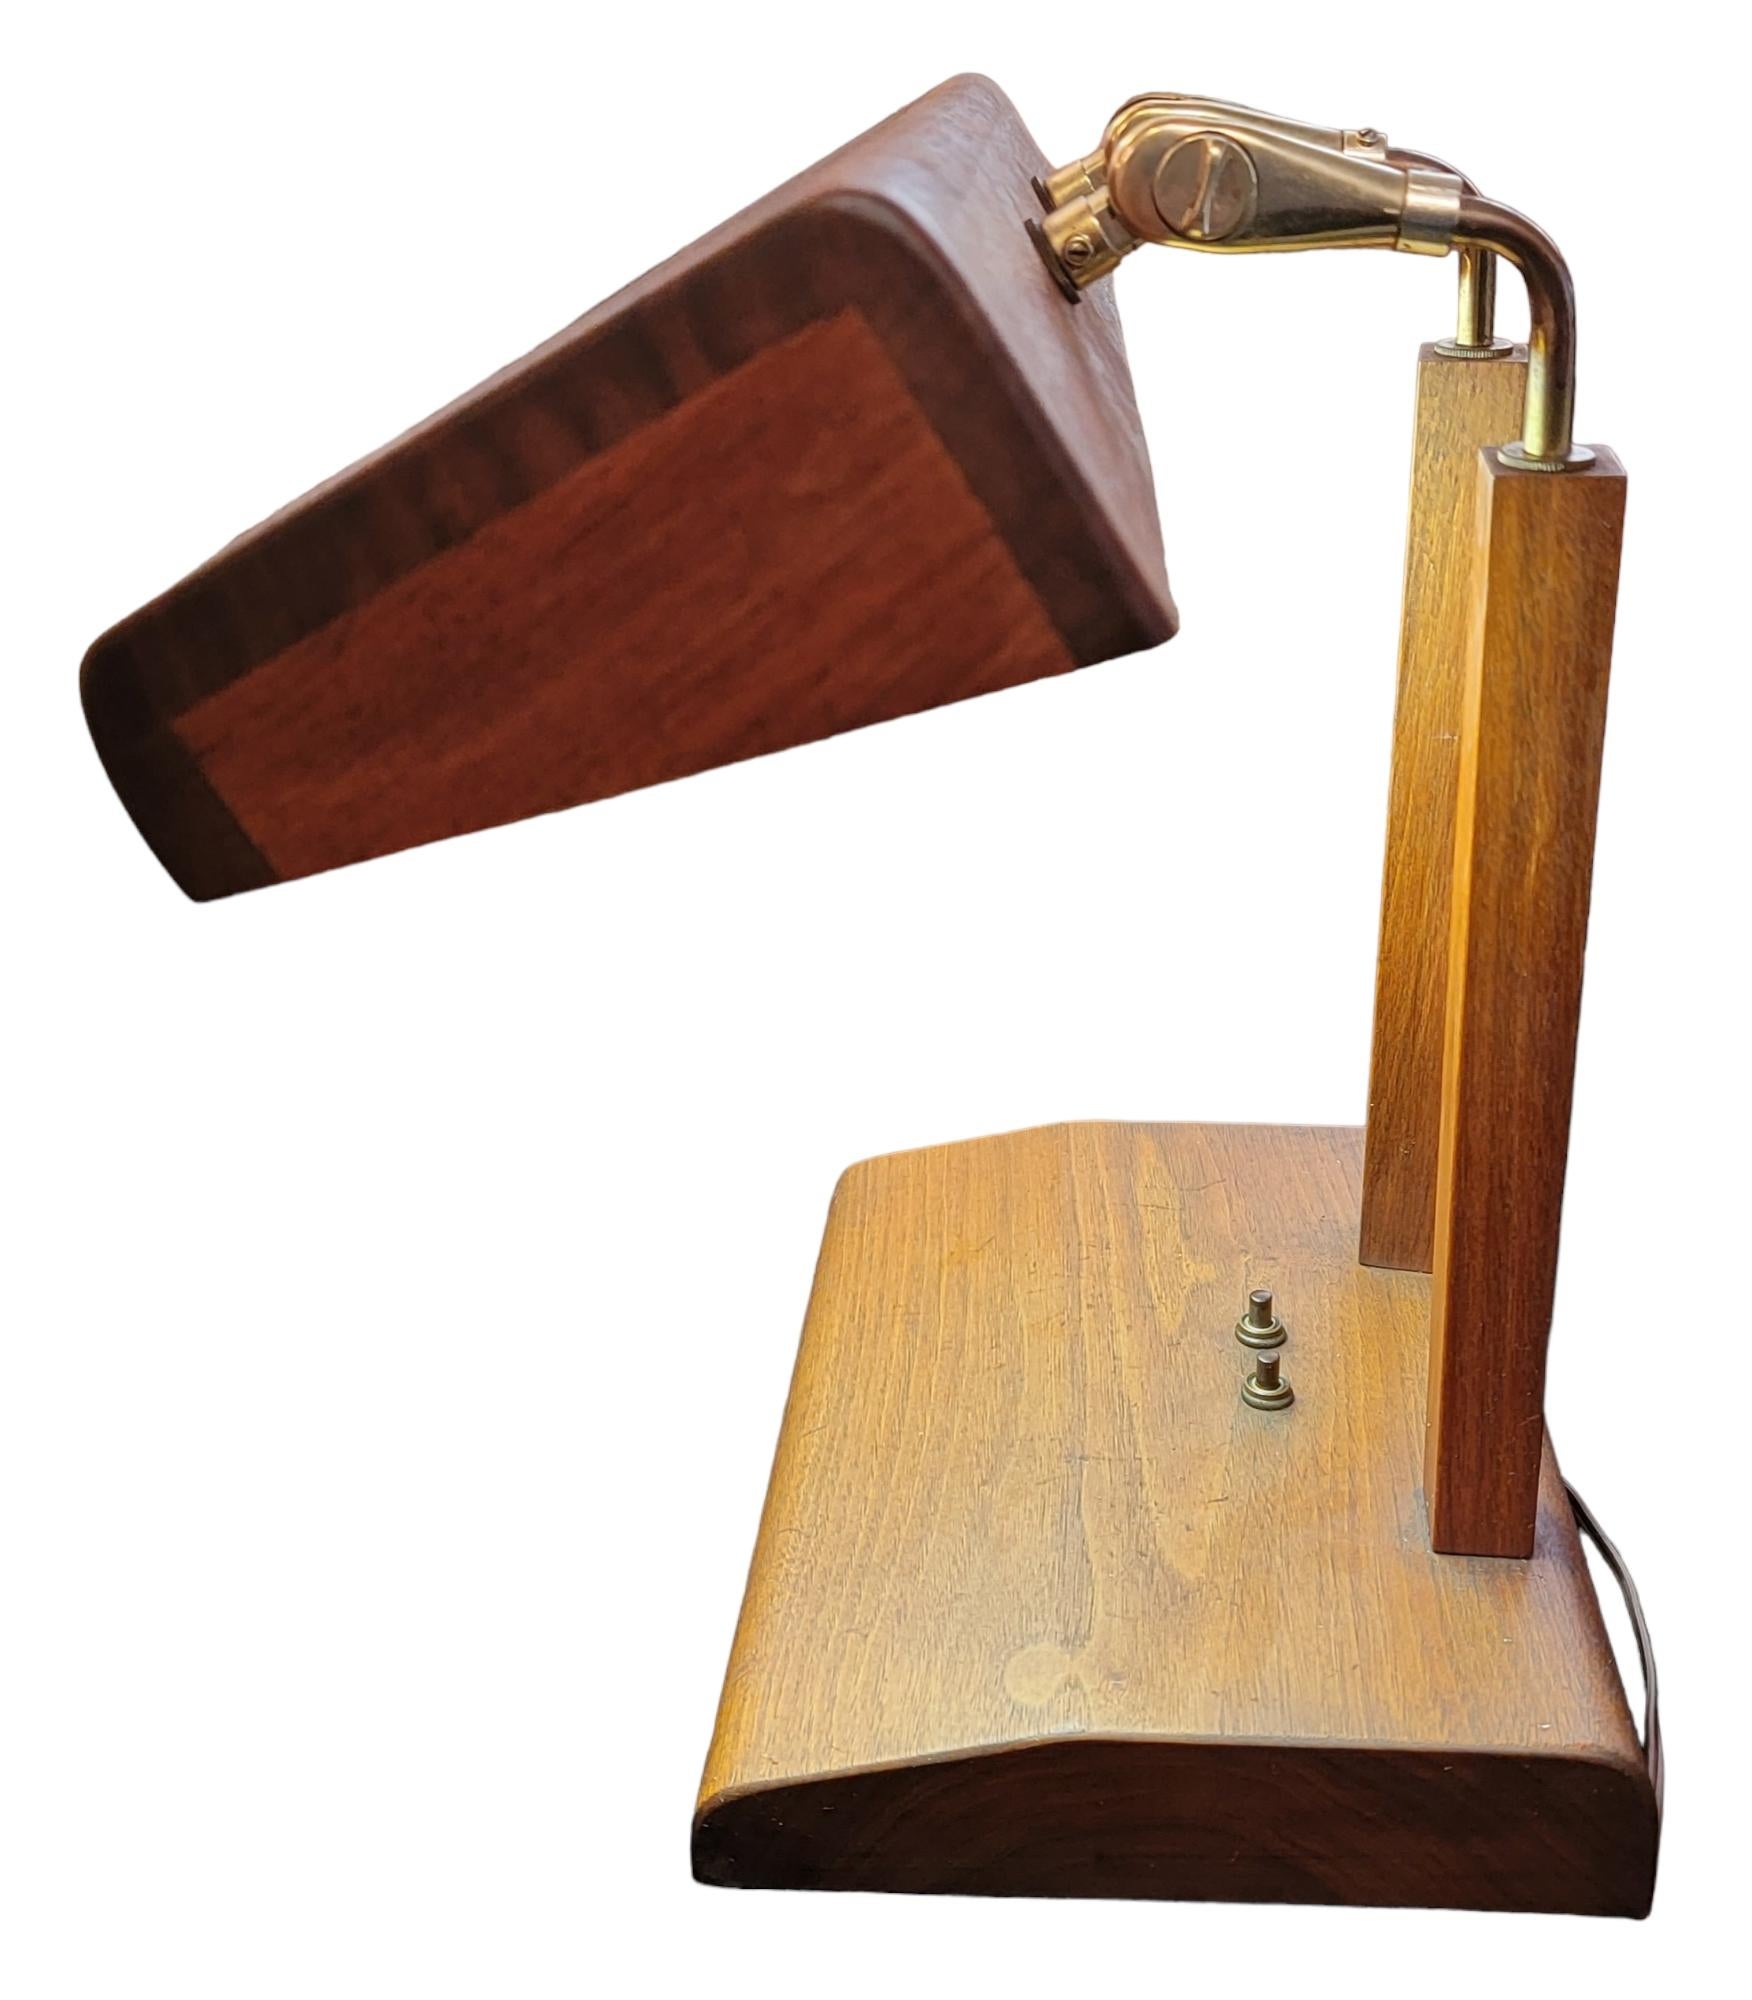 Hand Made wood and brass Scandinavian table lamp. Designed for ease of use and to provide plenty of light to its surrounding area. The neck of the light is bronze and adjustable up and down goose neck design.